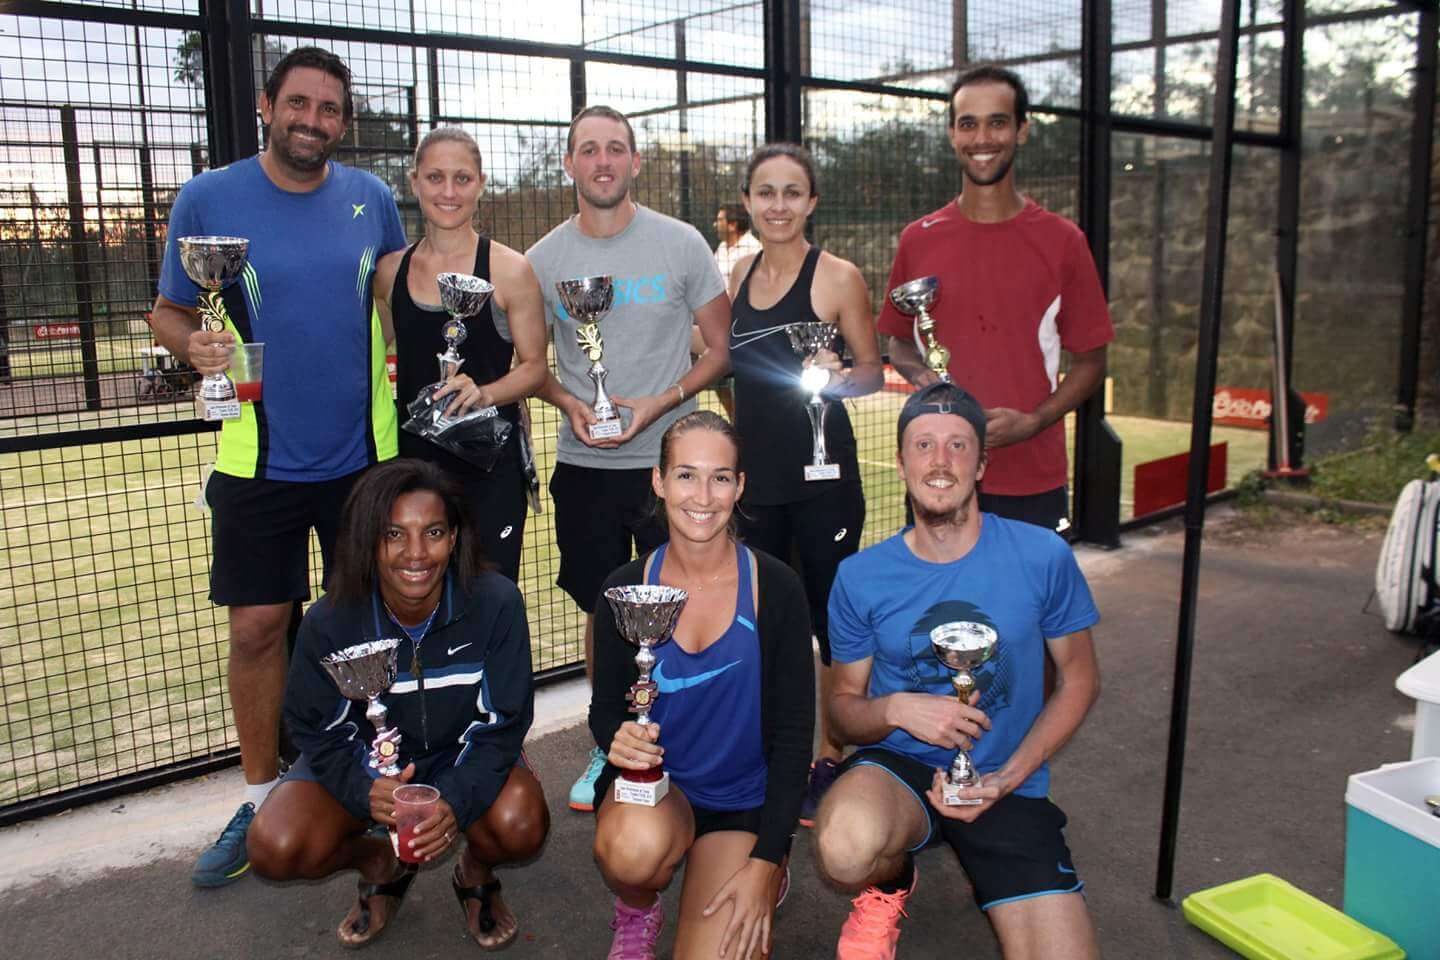 Reunion in fashion: Qualifiers for the French Championships padel